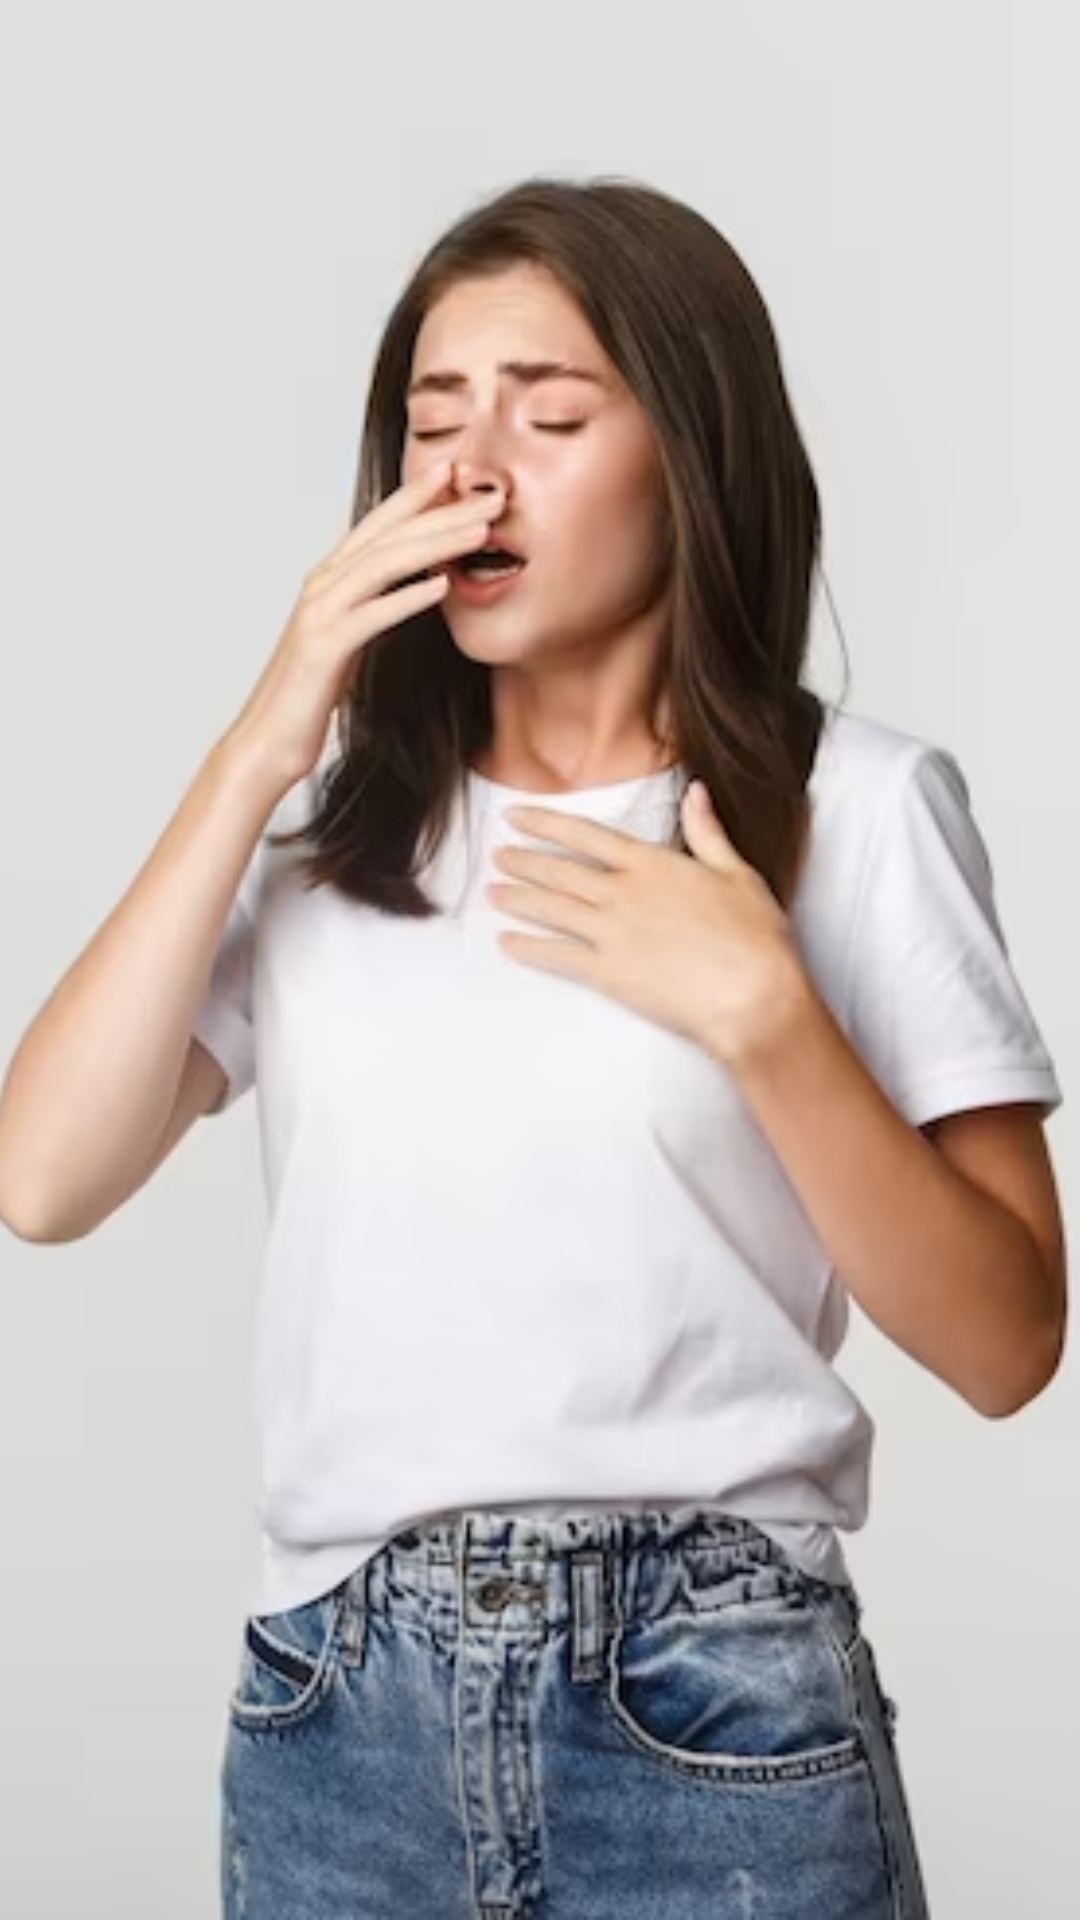 10 Common allergies you should be aware of